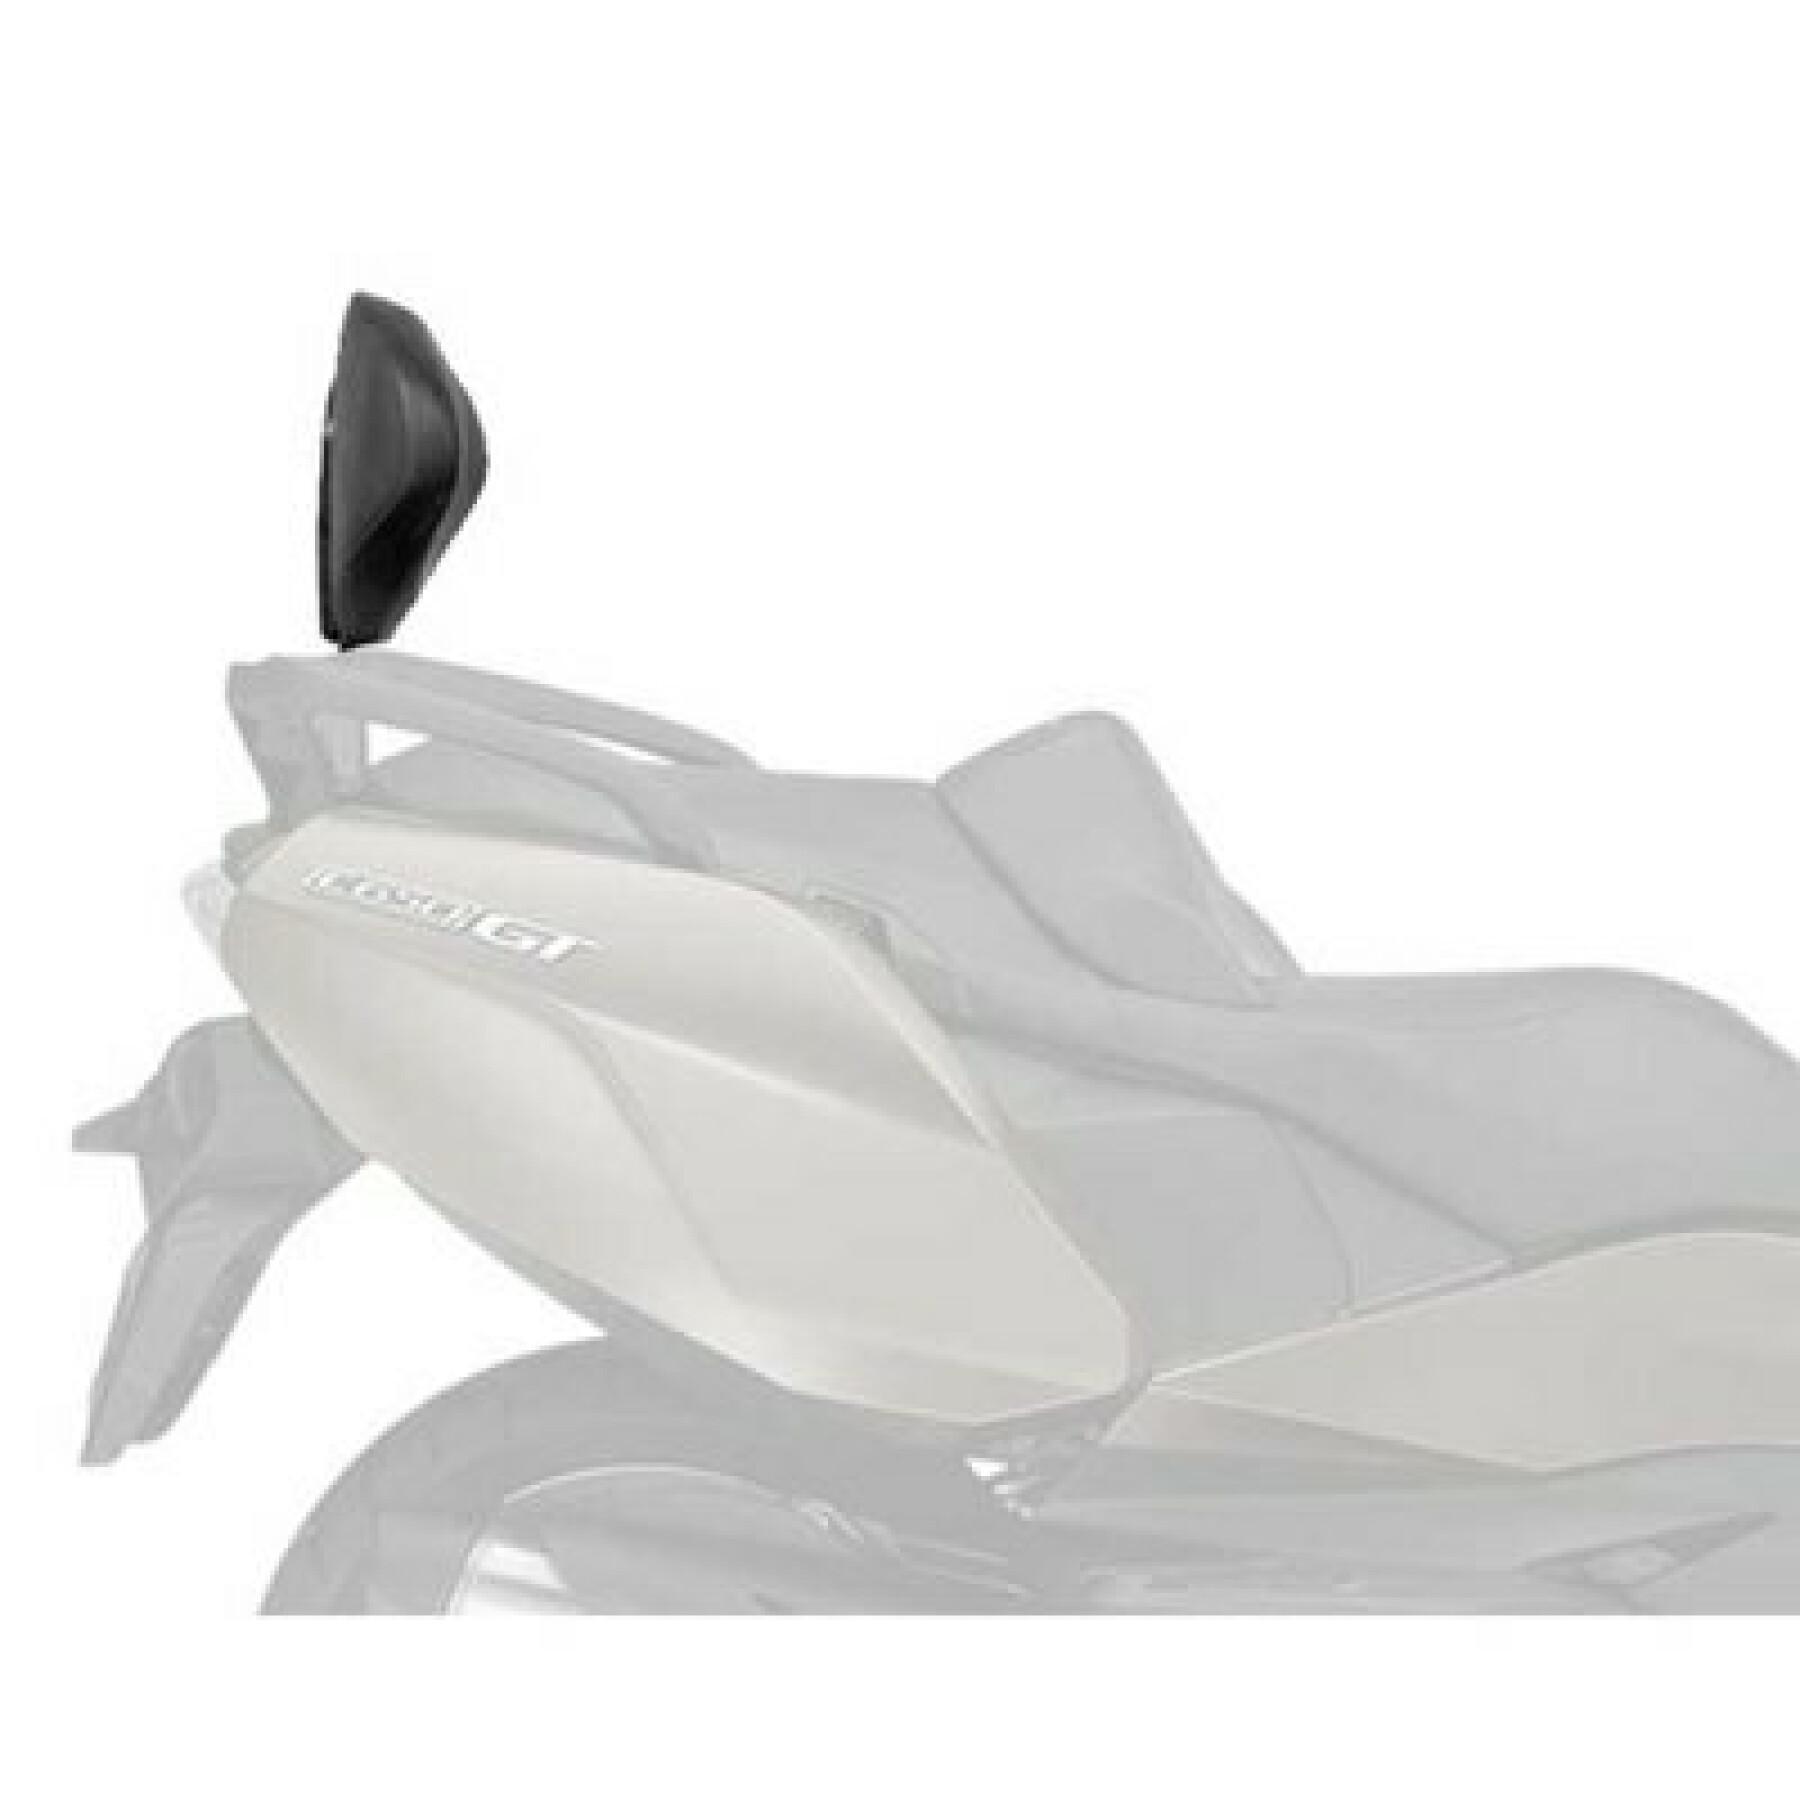 Scooter rugleuning Shad BMW c650gt